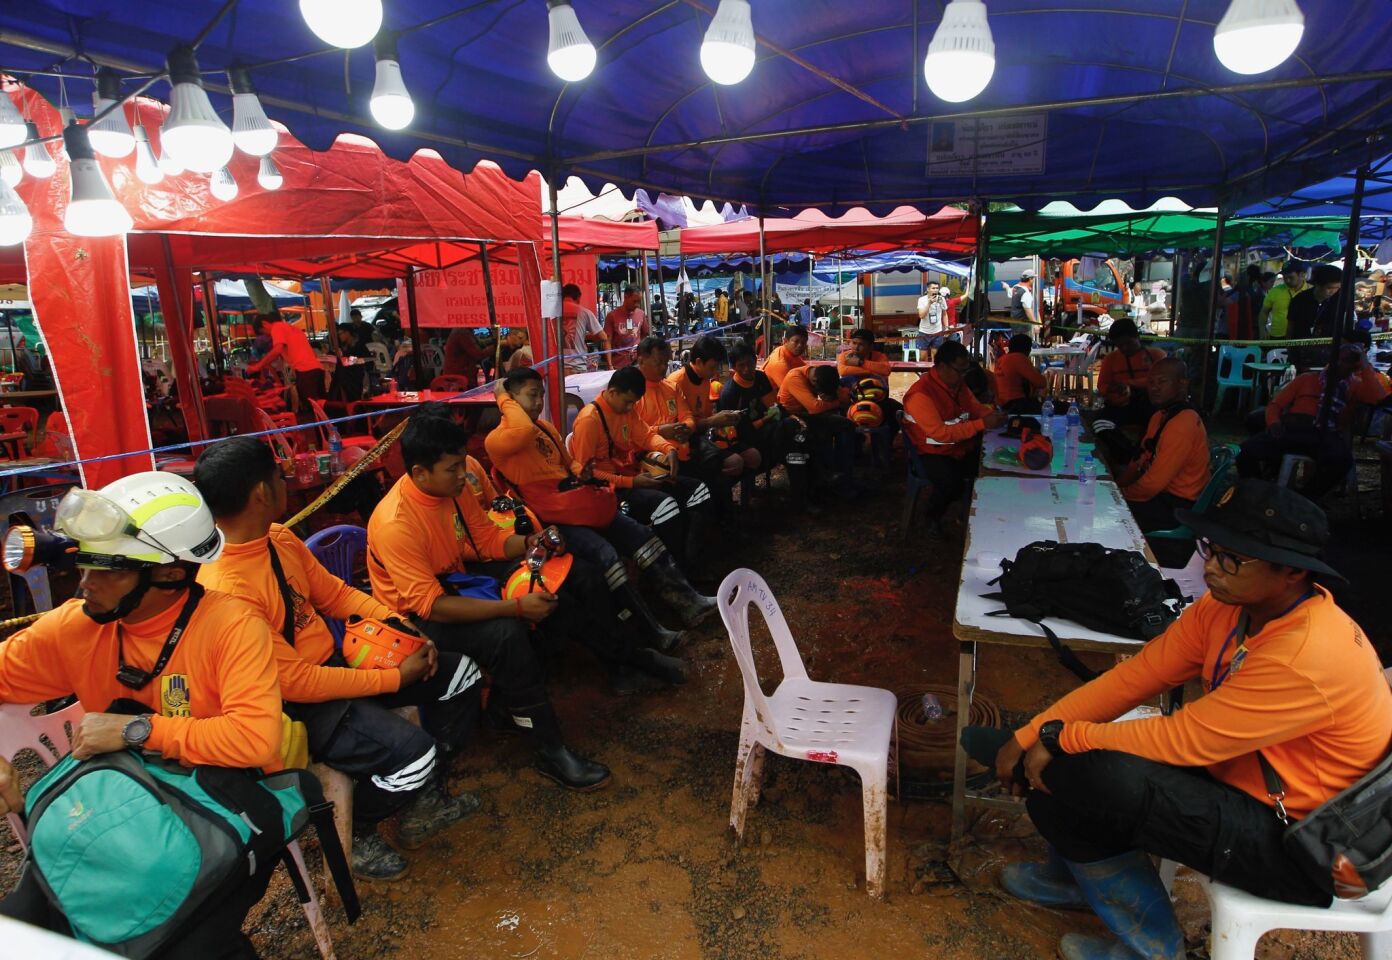 Thai civil defense volunteers prepare to join the rescue operation for the 12 trapped boys and their coach Sunday at Tham Luang cave.